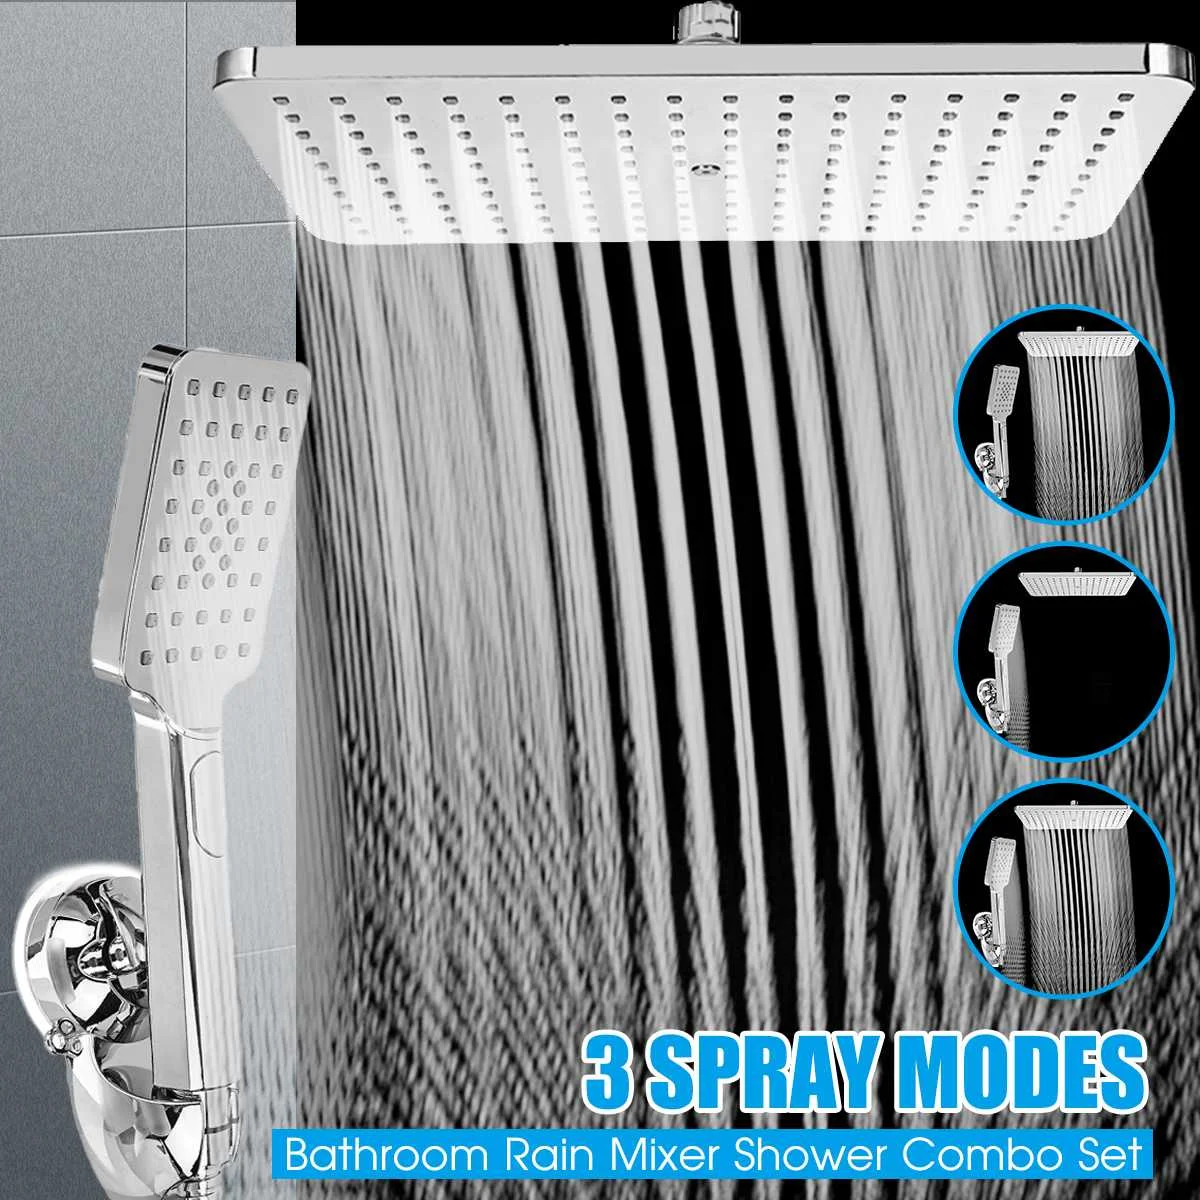 

3 Spray Modes Wall Mount Rainfall Shower Faucet Set Premium Chrome Concealed Bathroom Faucets System 8 inch with Shower Mixer